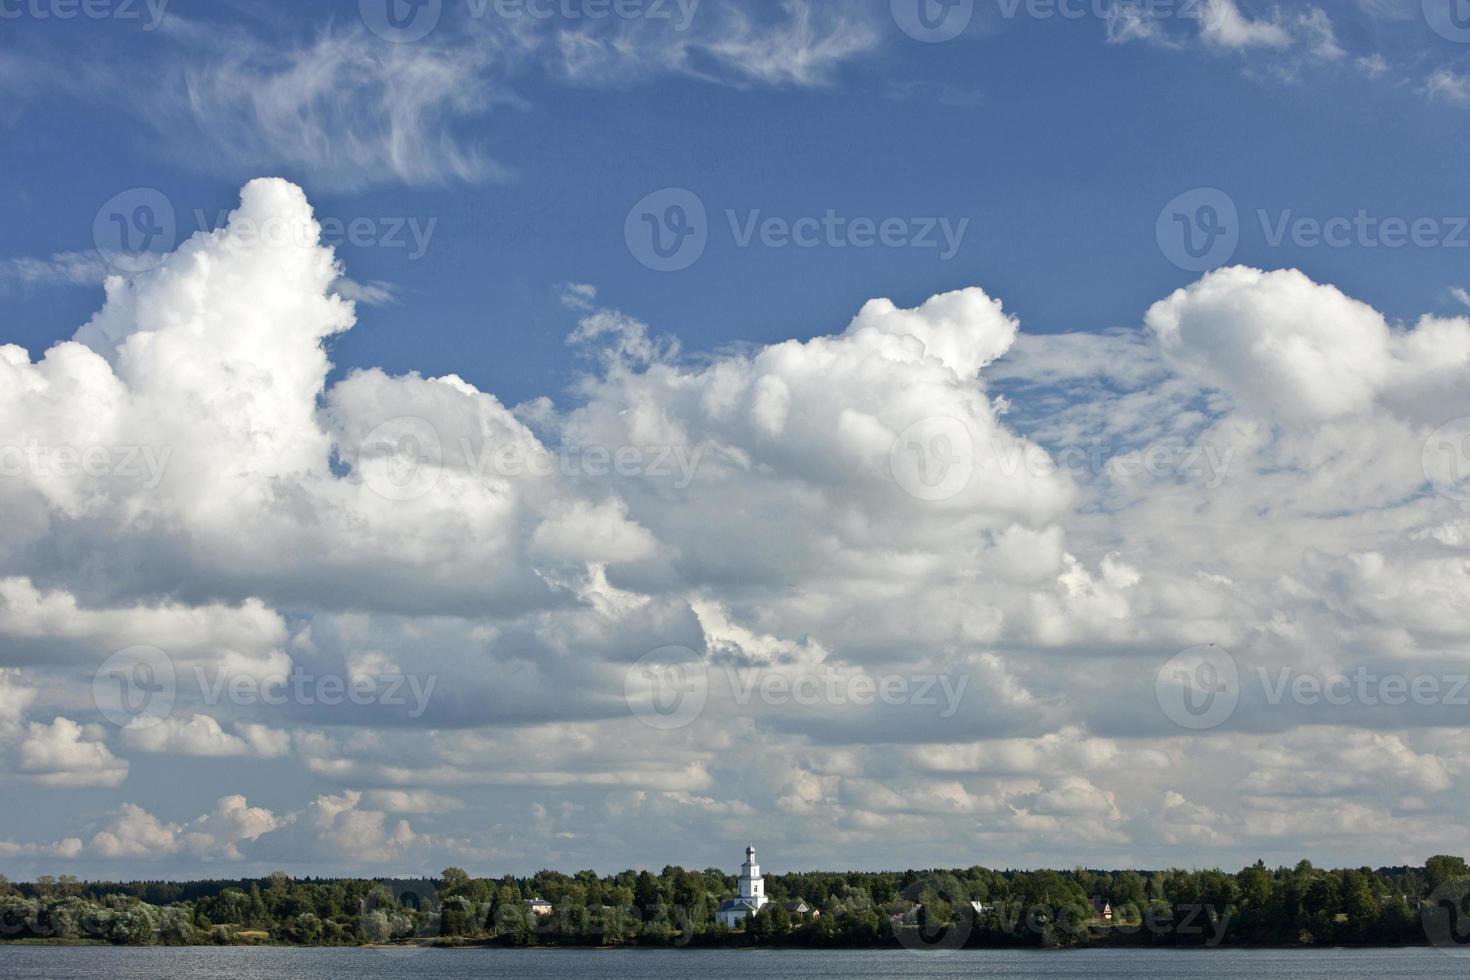 White Cumulus clouds in blue sky by day, natural background, sky, day, clouds, water, lake, pond, trees, forest, Church, photo